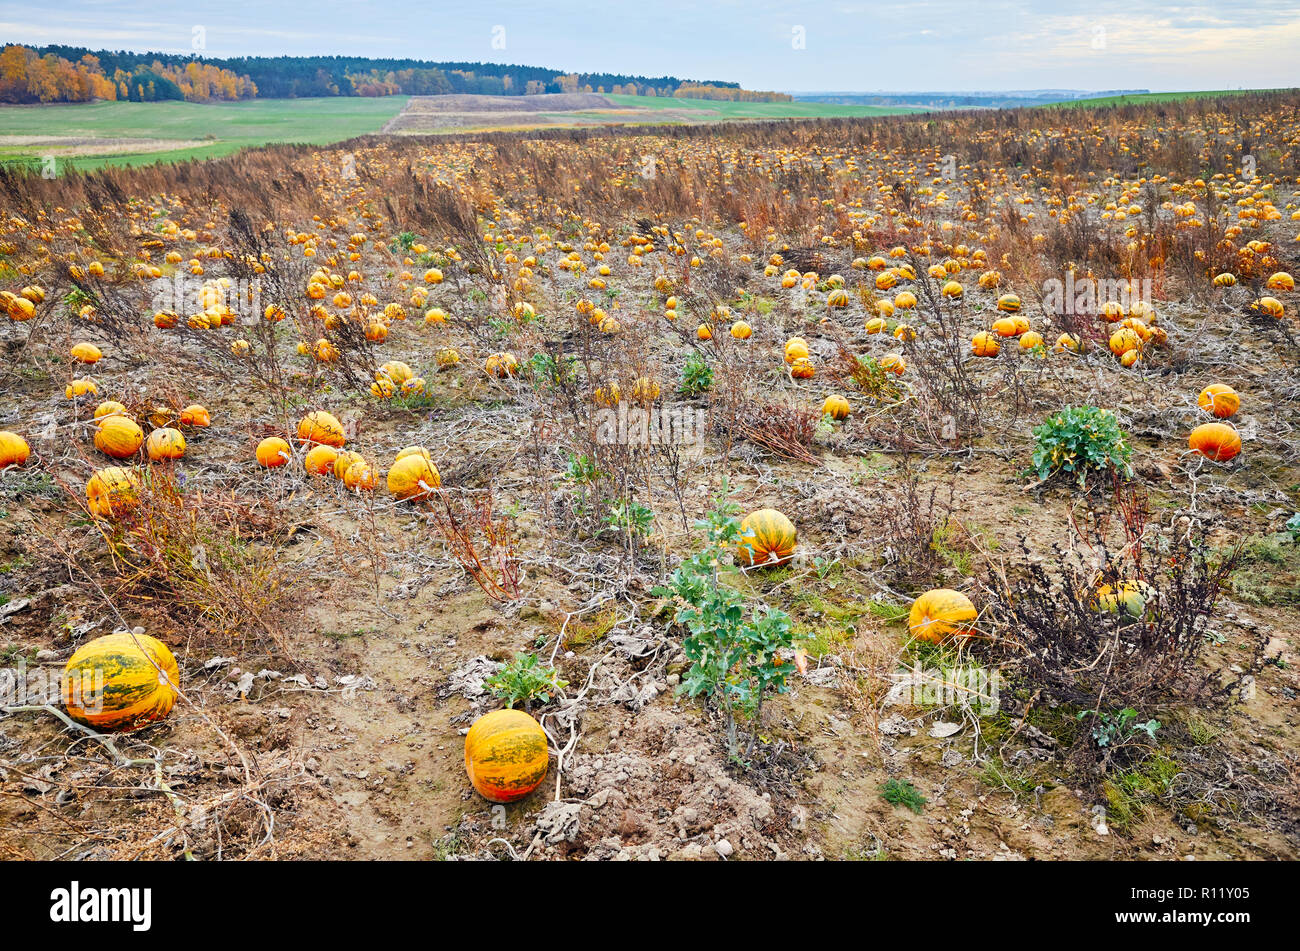 Pumpkin field in autumn. This pumpkin type is used for Halloween decoration, pressing seeds oil and for cooking. Stock Photo